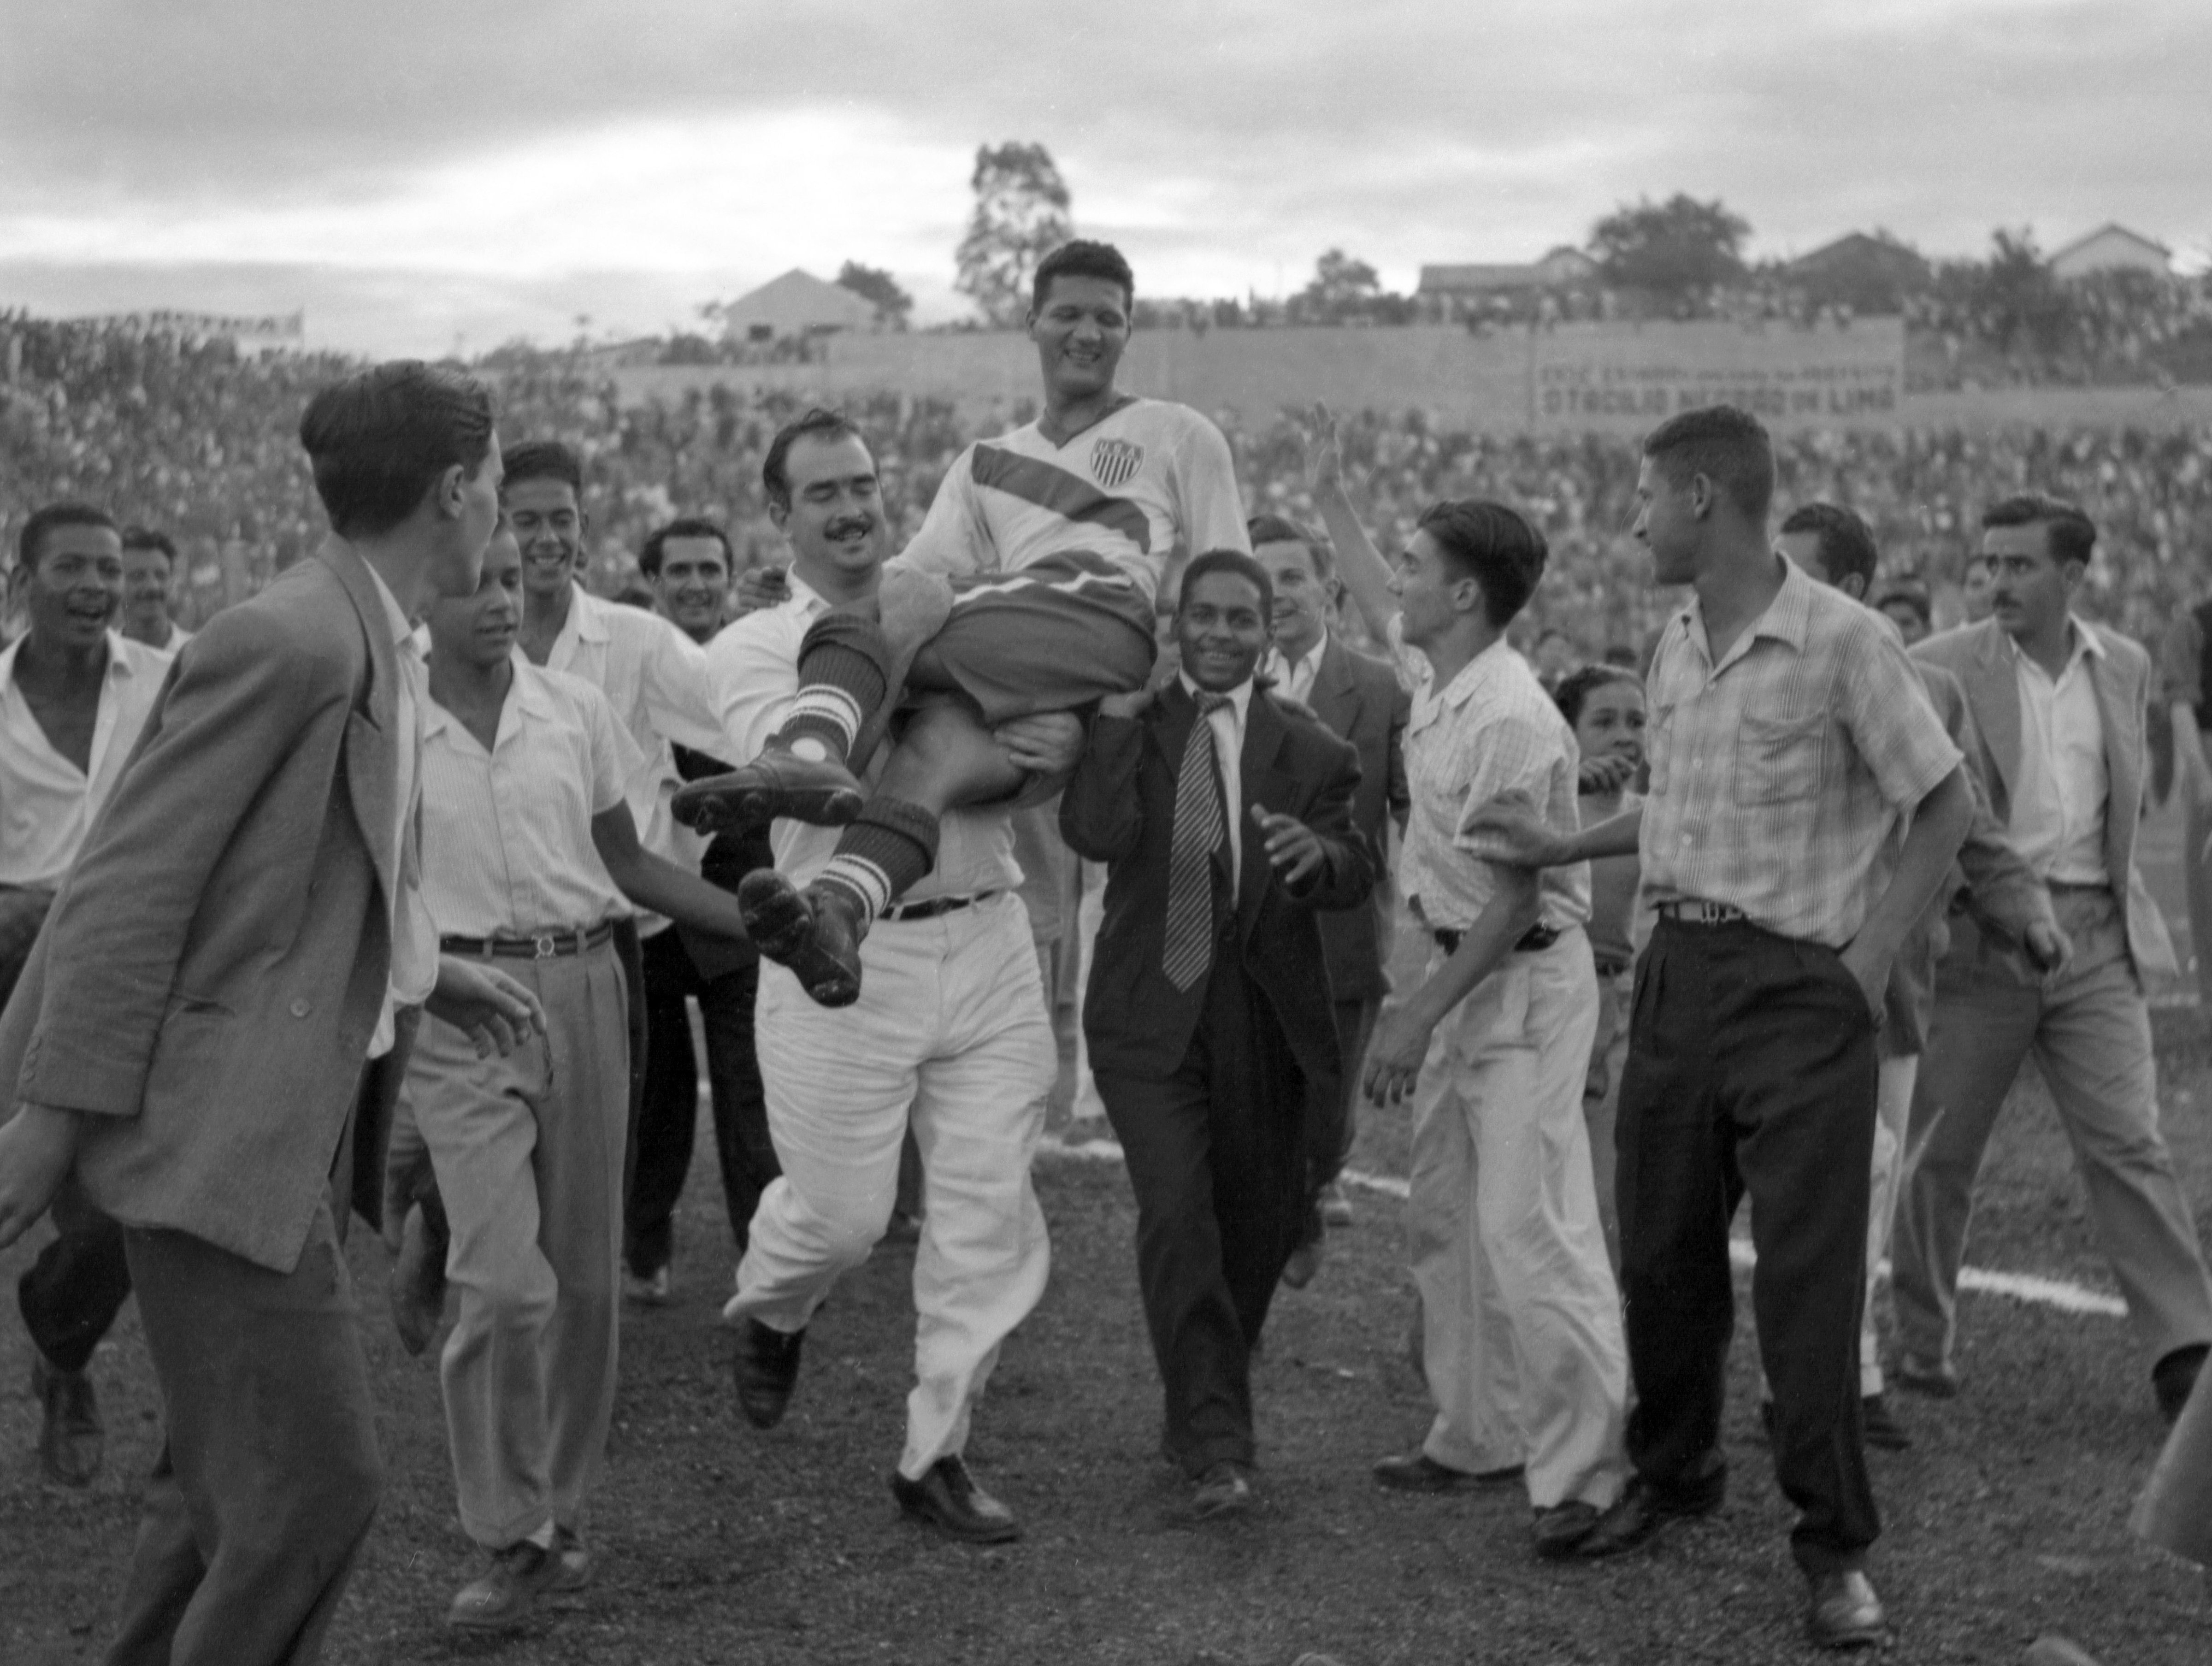 U.S. forward Joe Gaetjens is carried off by cheering fans after Team USA beat England 1-0 in a World Cup soccer match in Belo Horizonte, Brazil, June 28, 1950. (AP)